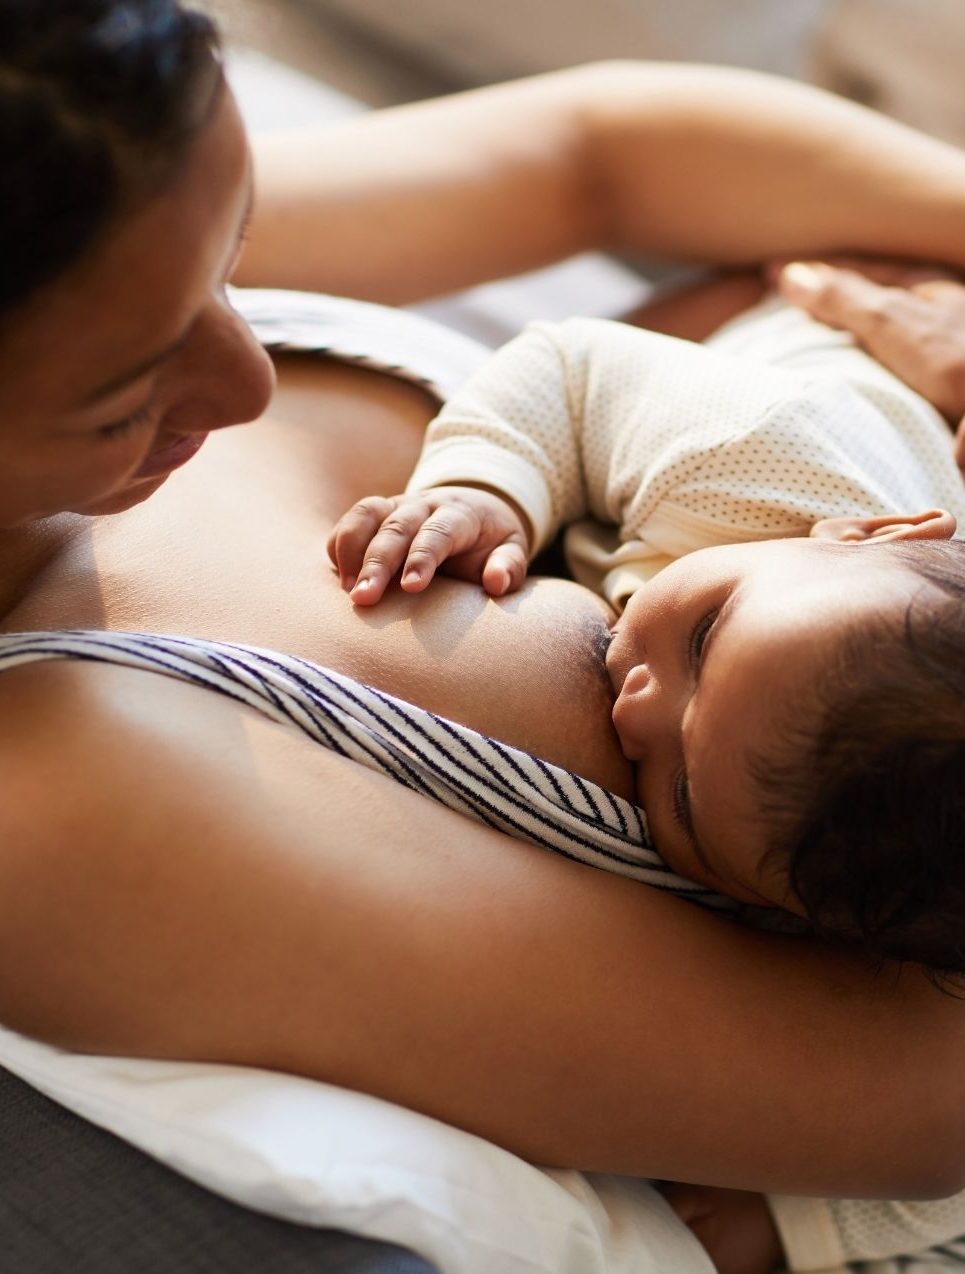 5 New Breastfeeding Products to Try ASAP